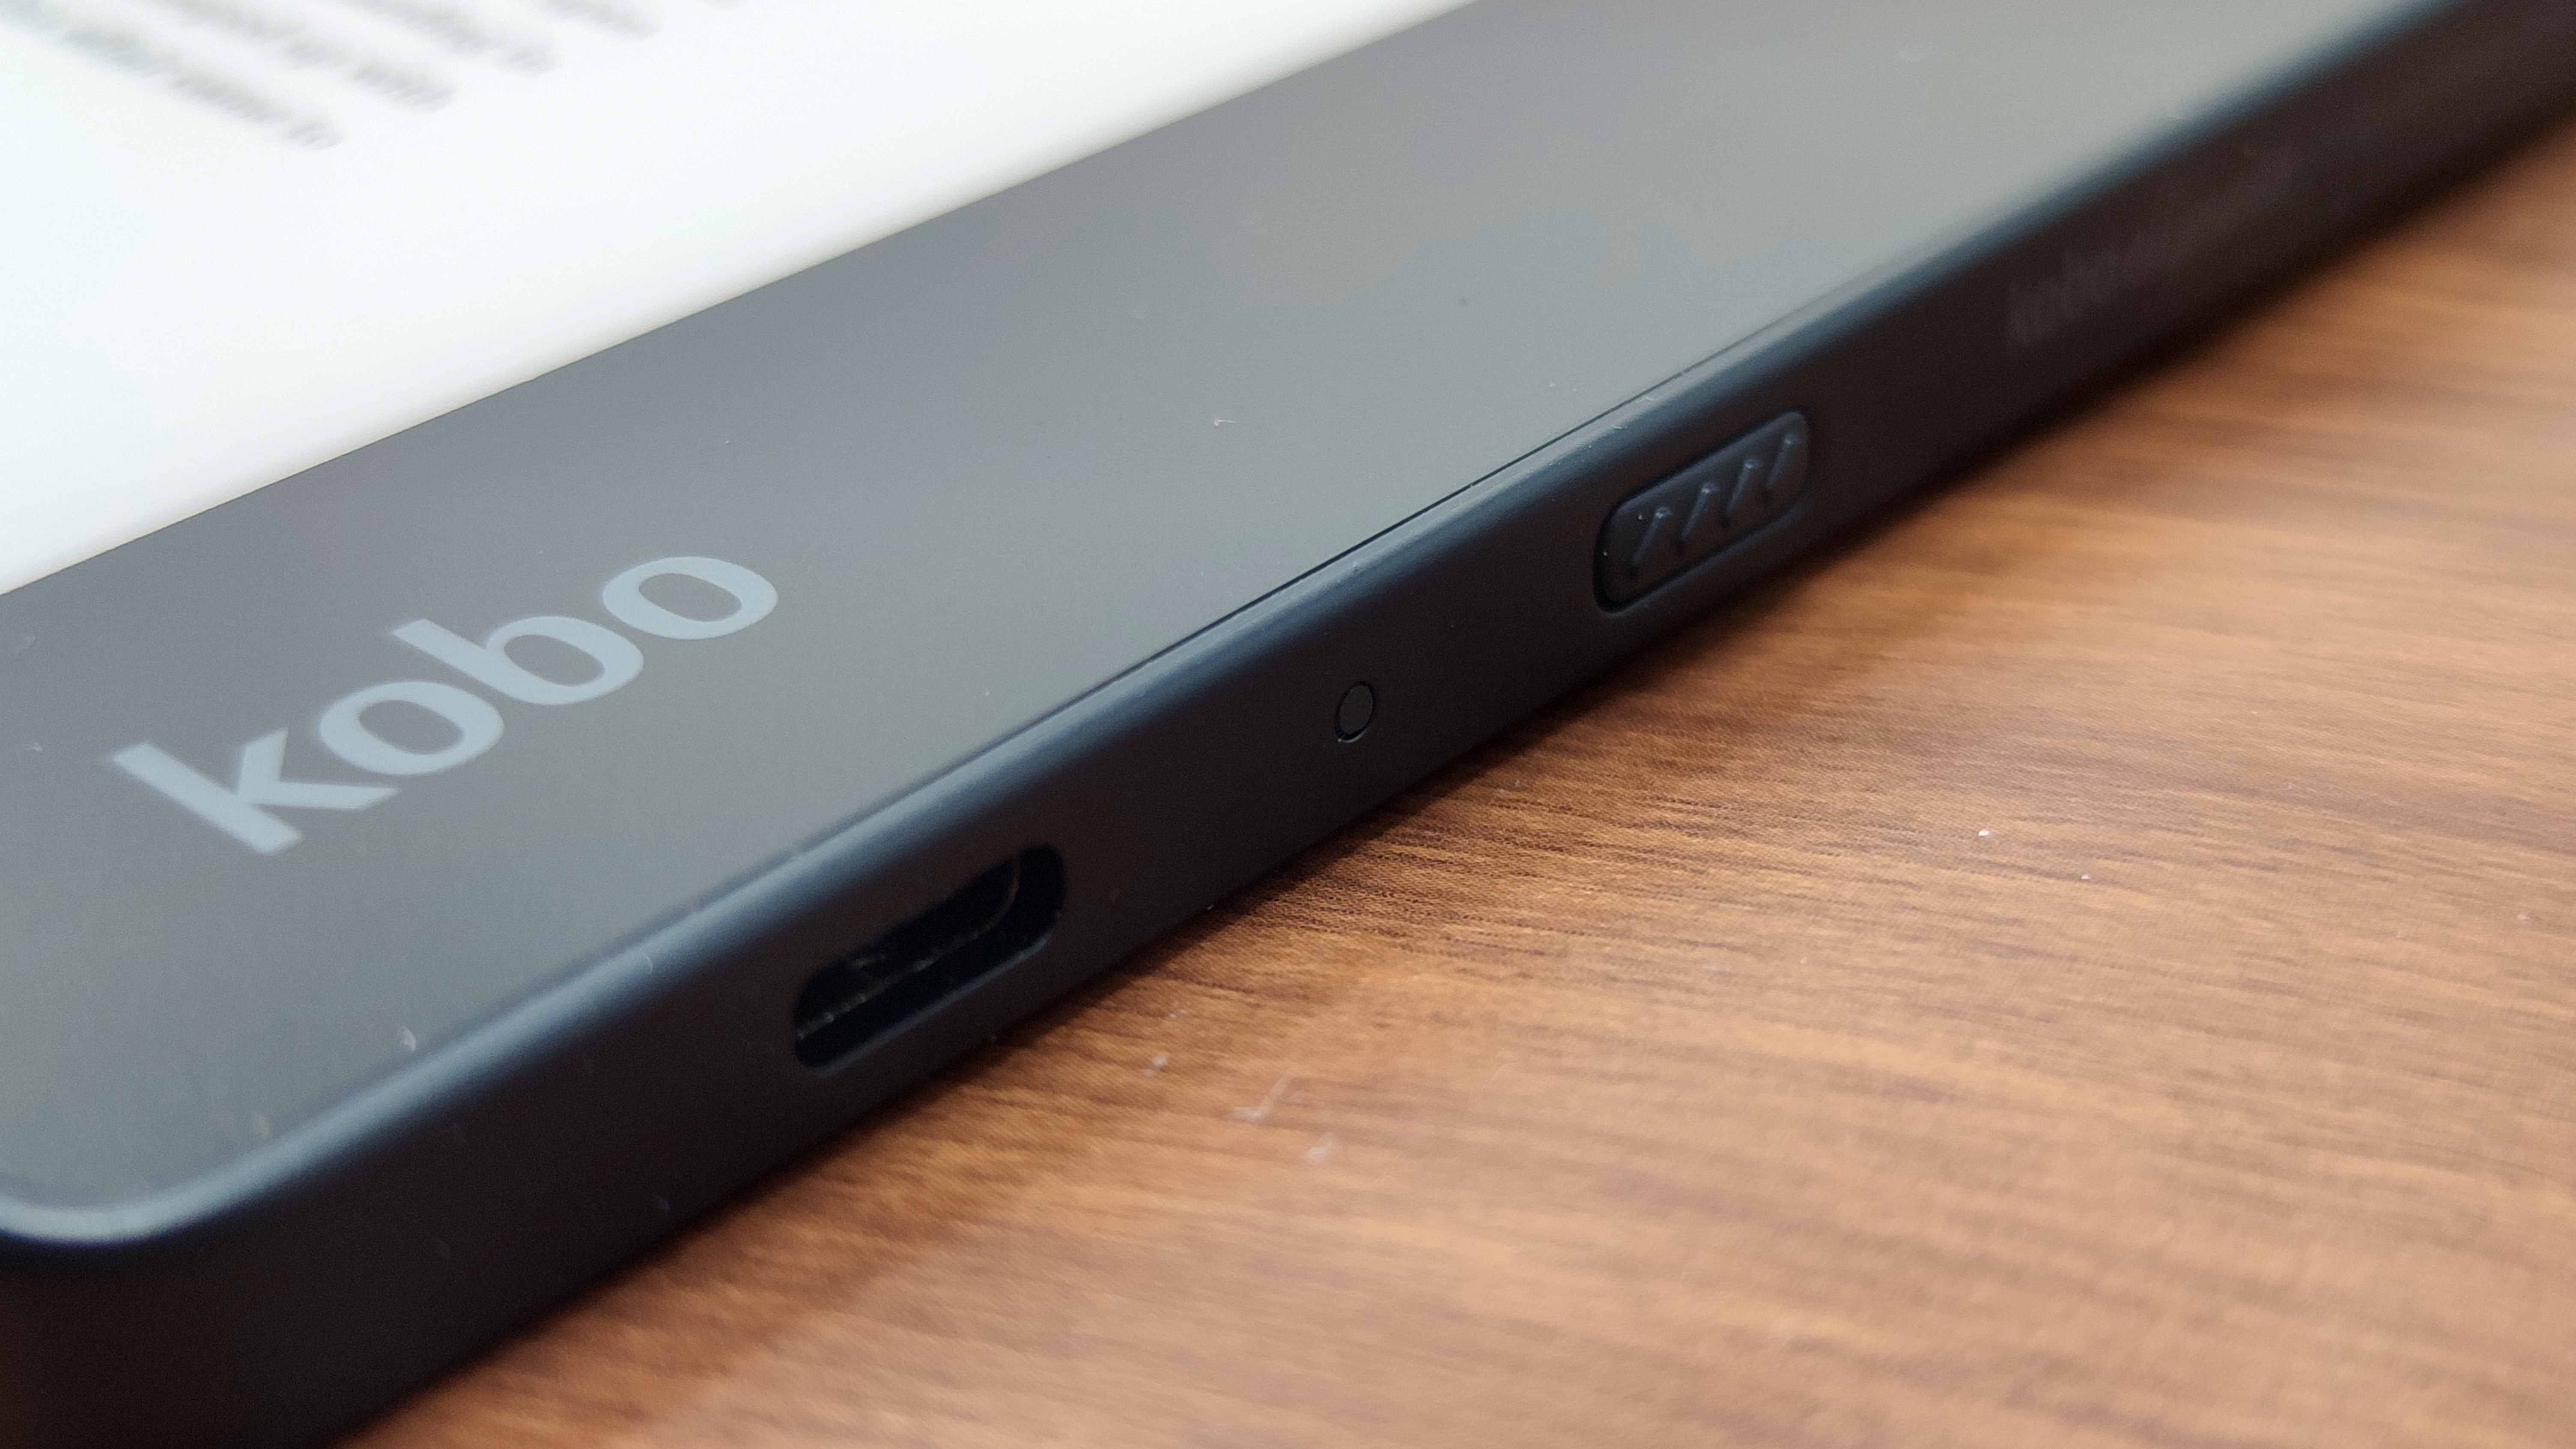 The Kobo Elipsa 2E's charging port and power button.